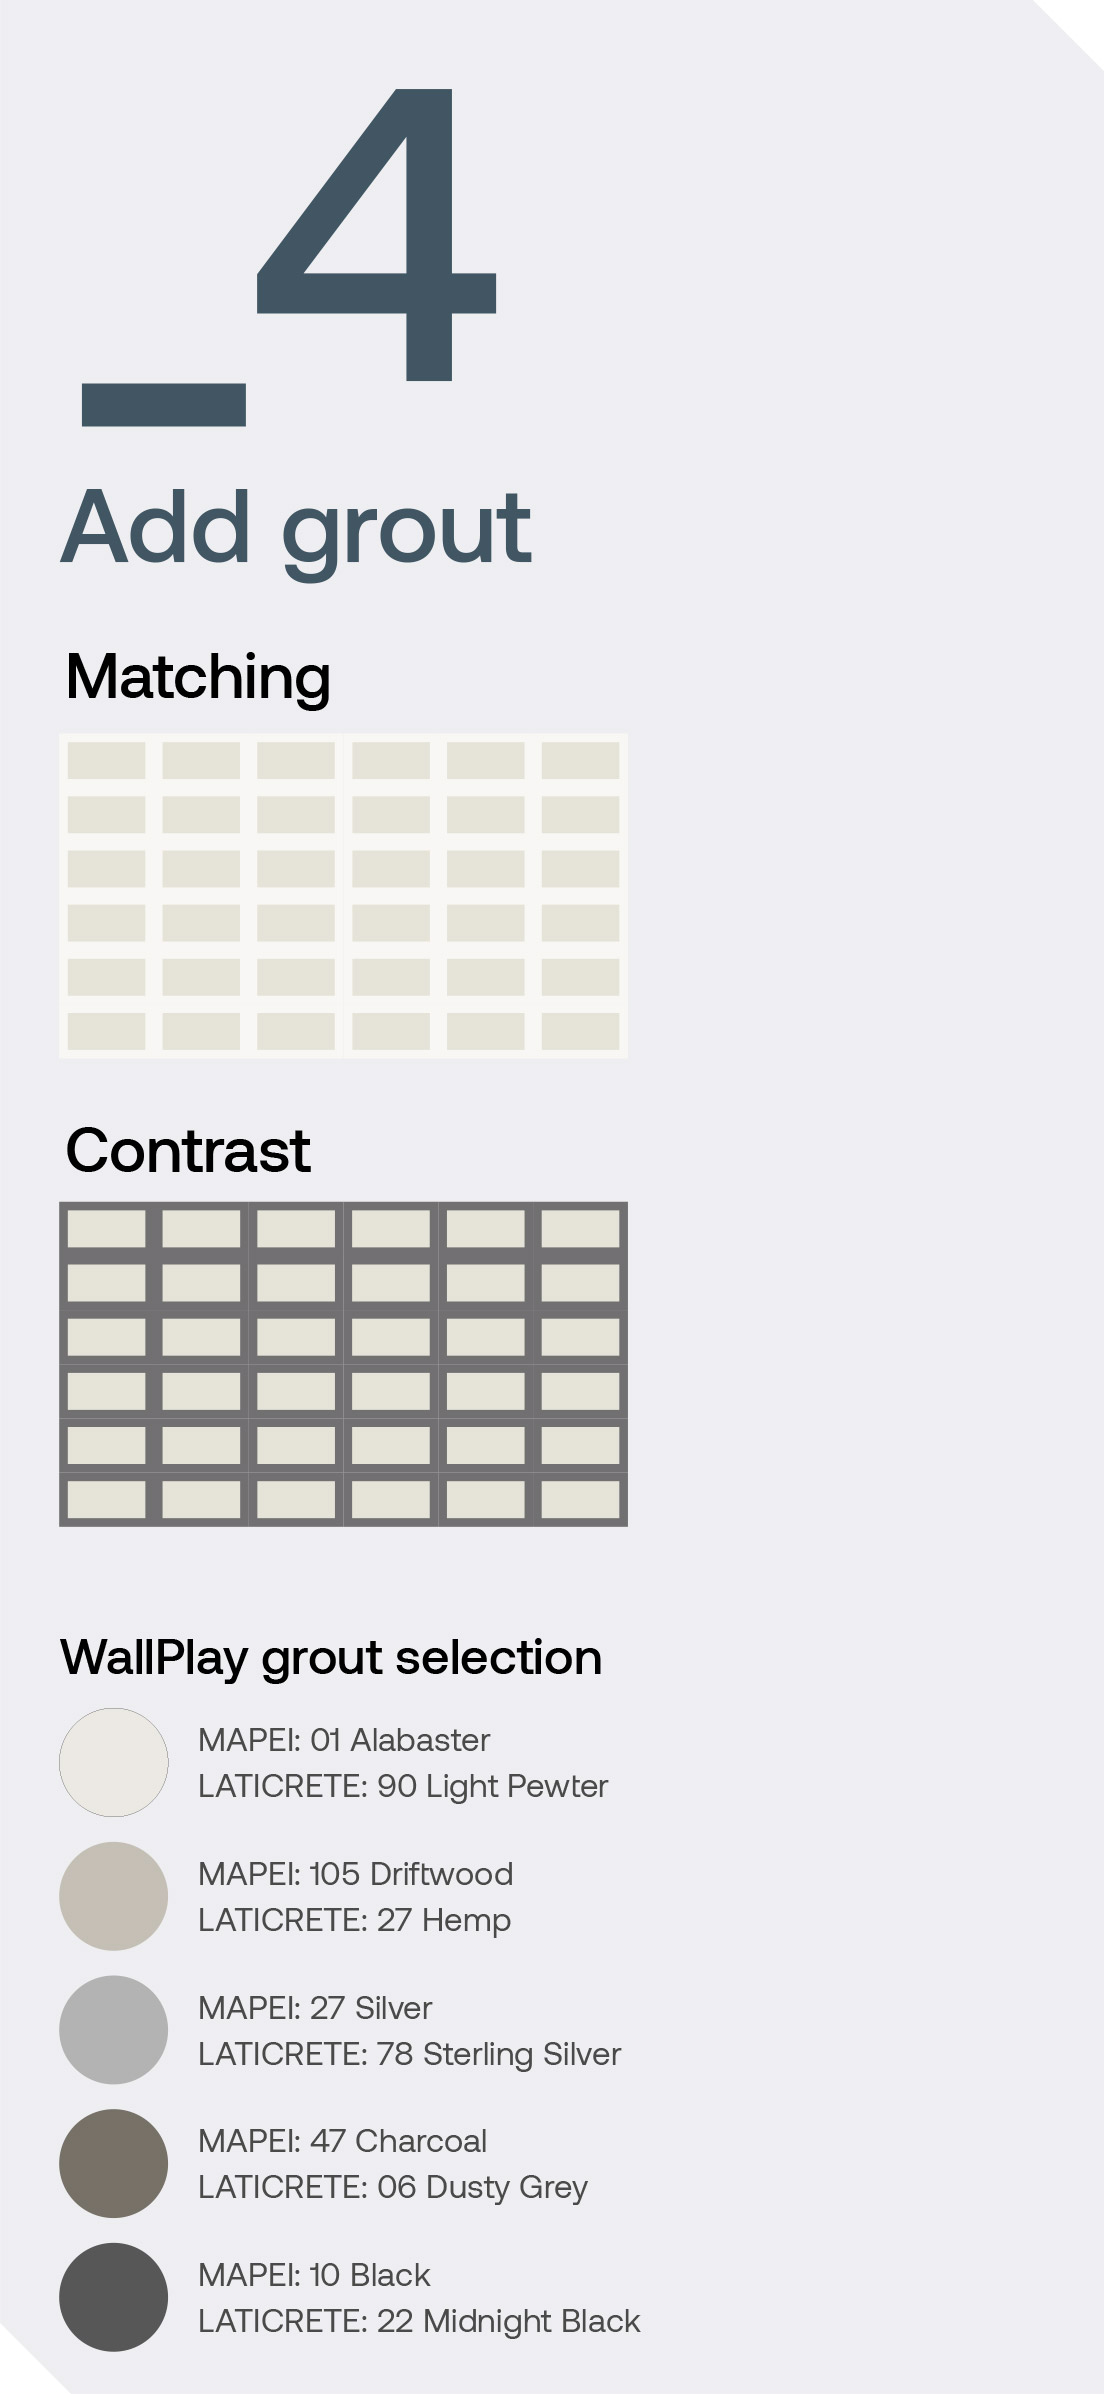 Add grout